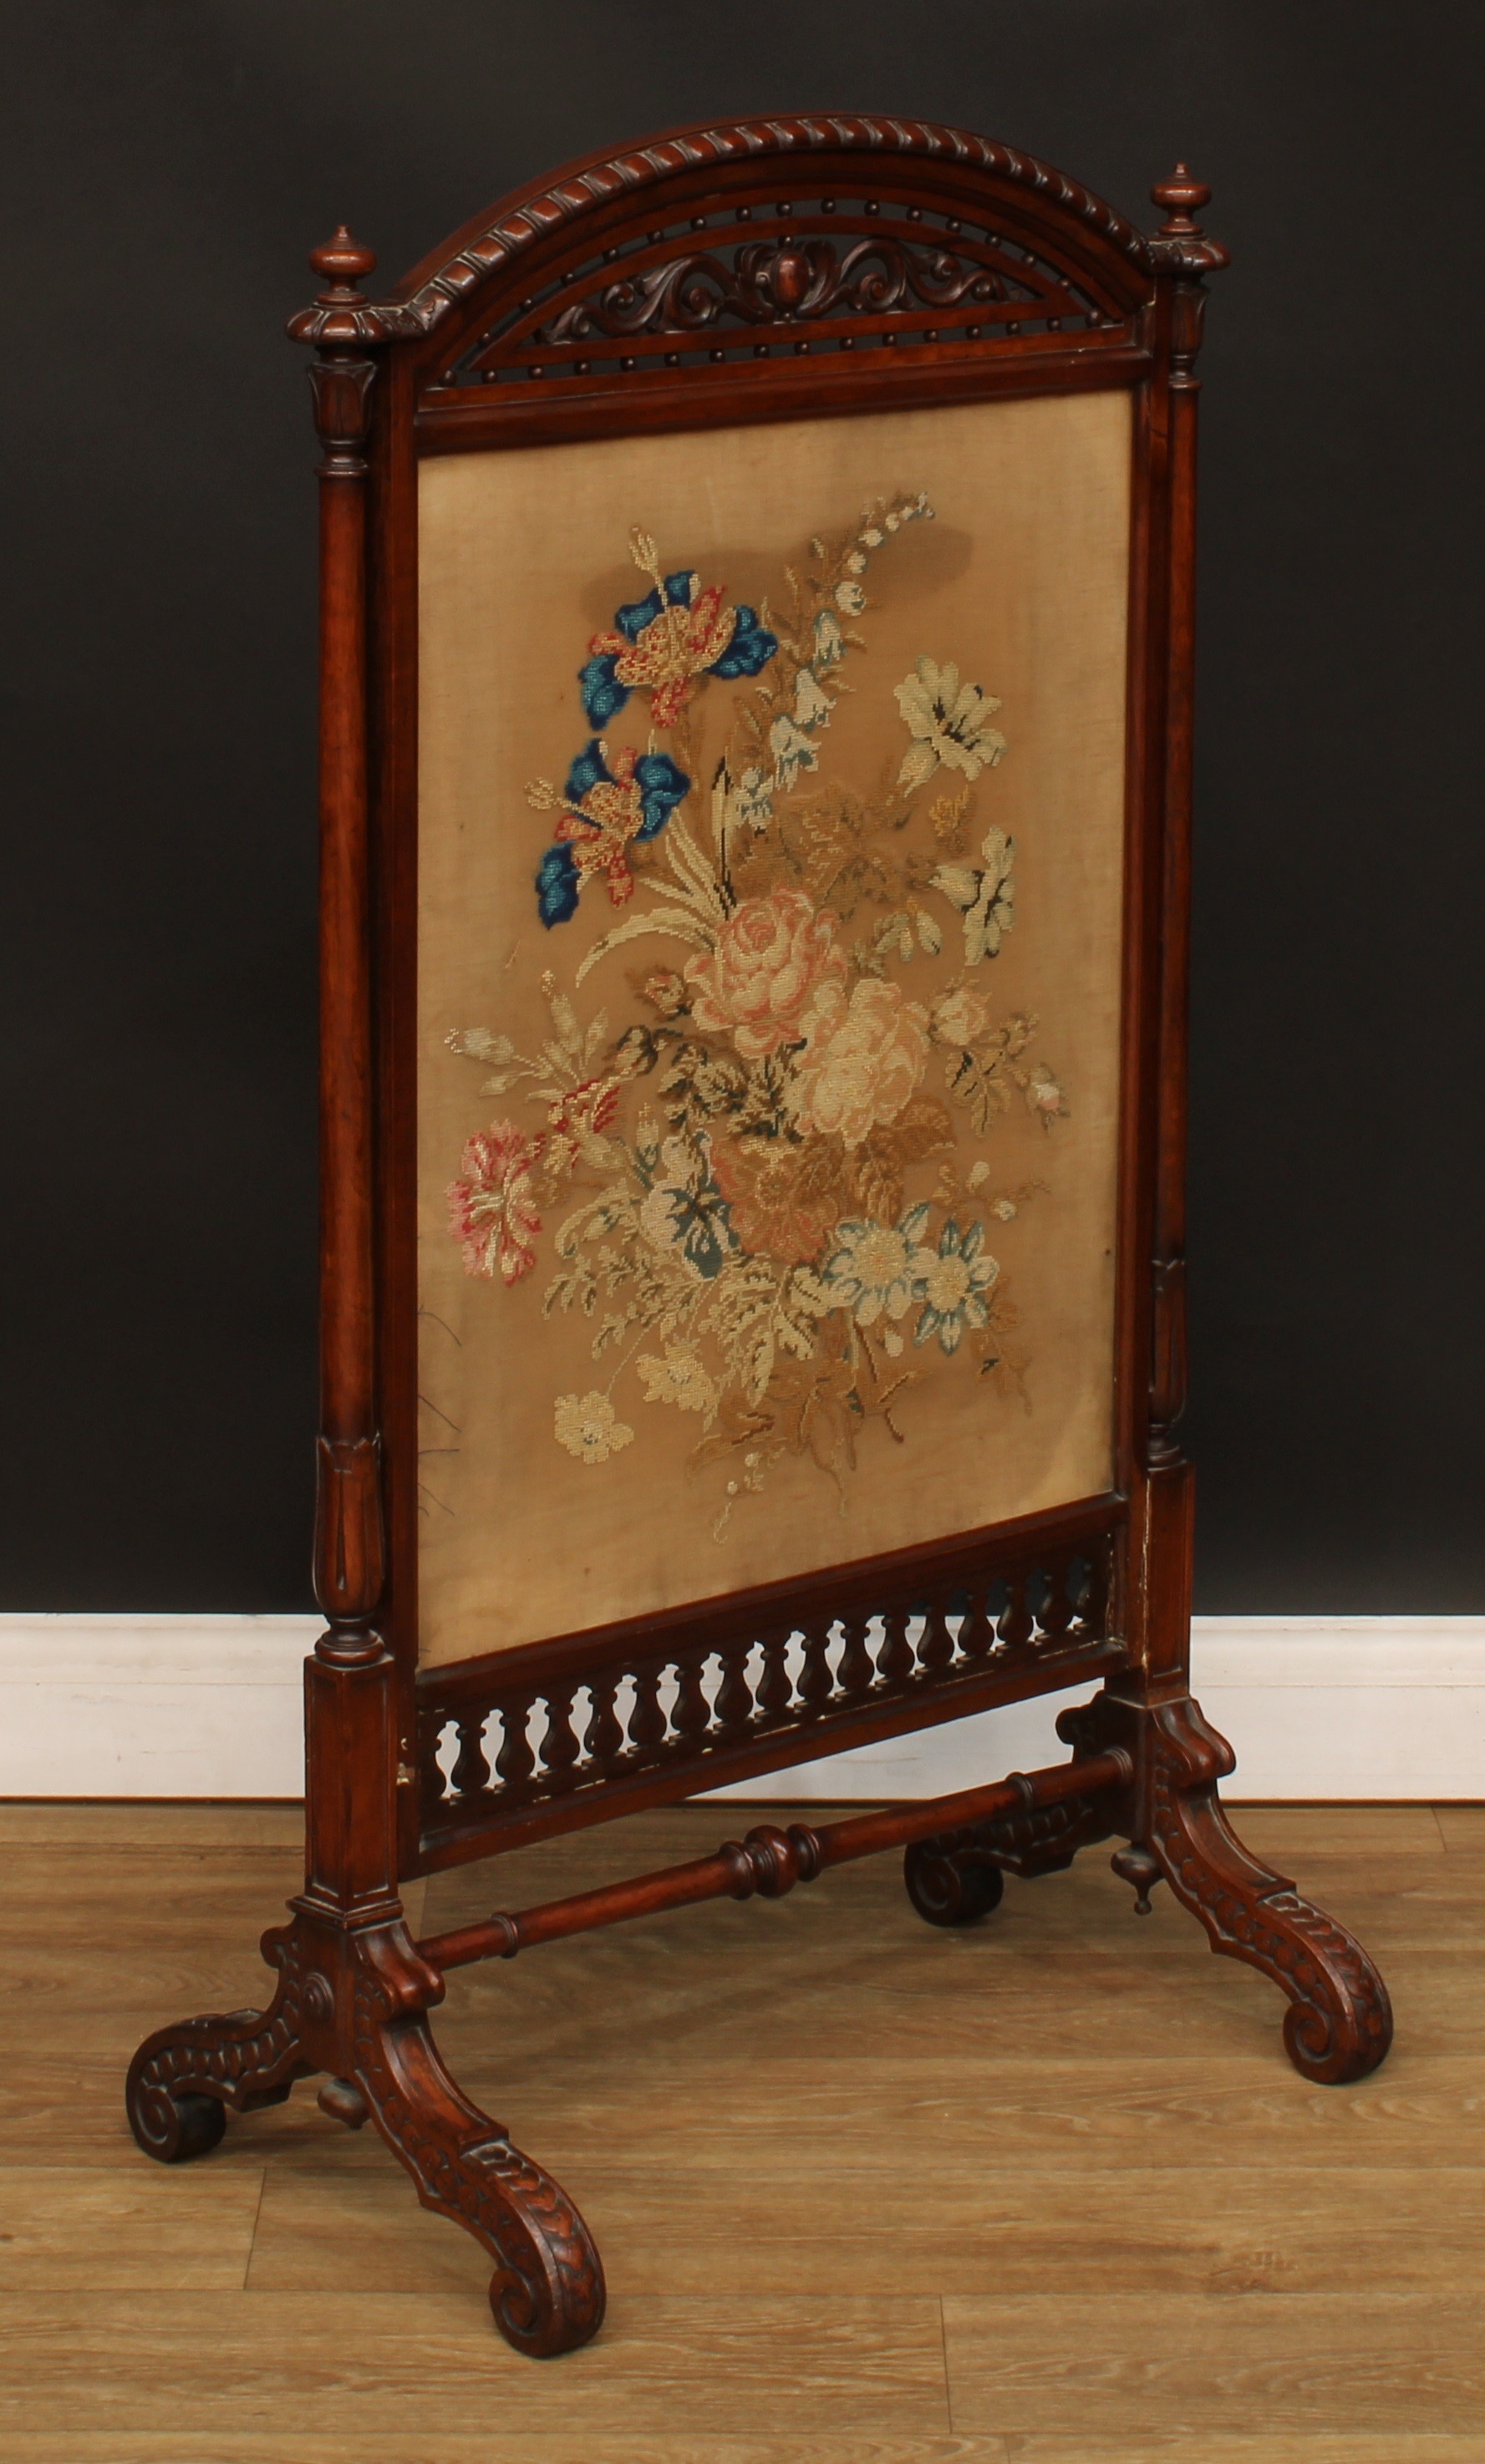 A 19th century mahogany fire screen, arched top with pierced panel carved with acanthus, woodwork - Image 2 of 3